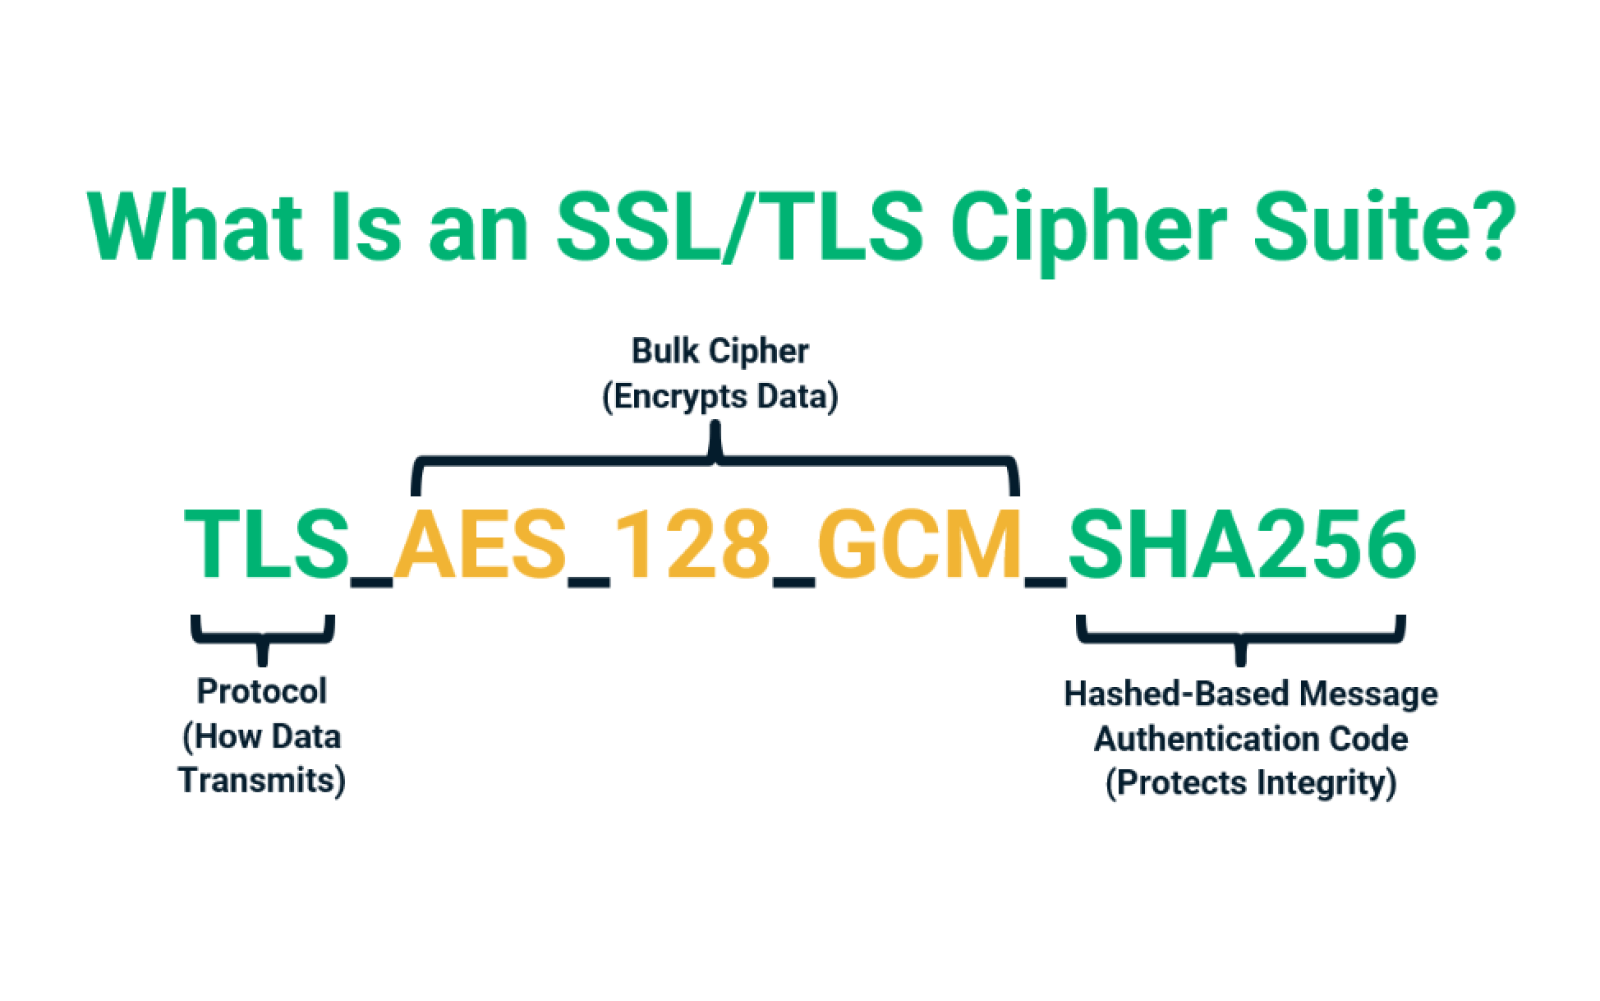 What are the vulnerable TLS 1.2 ciphers?